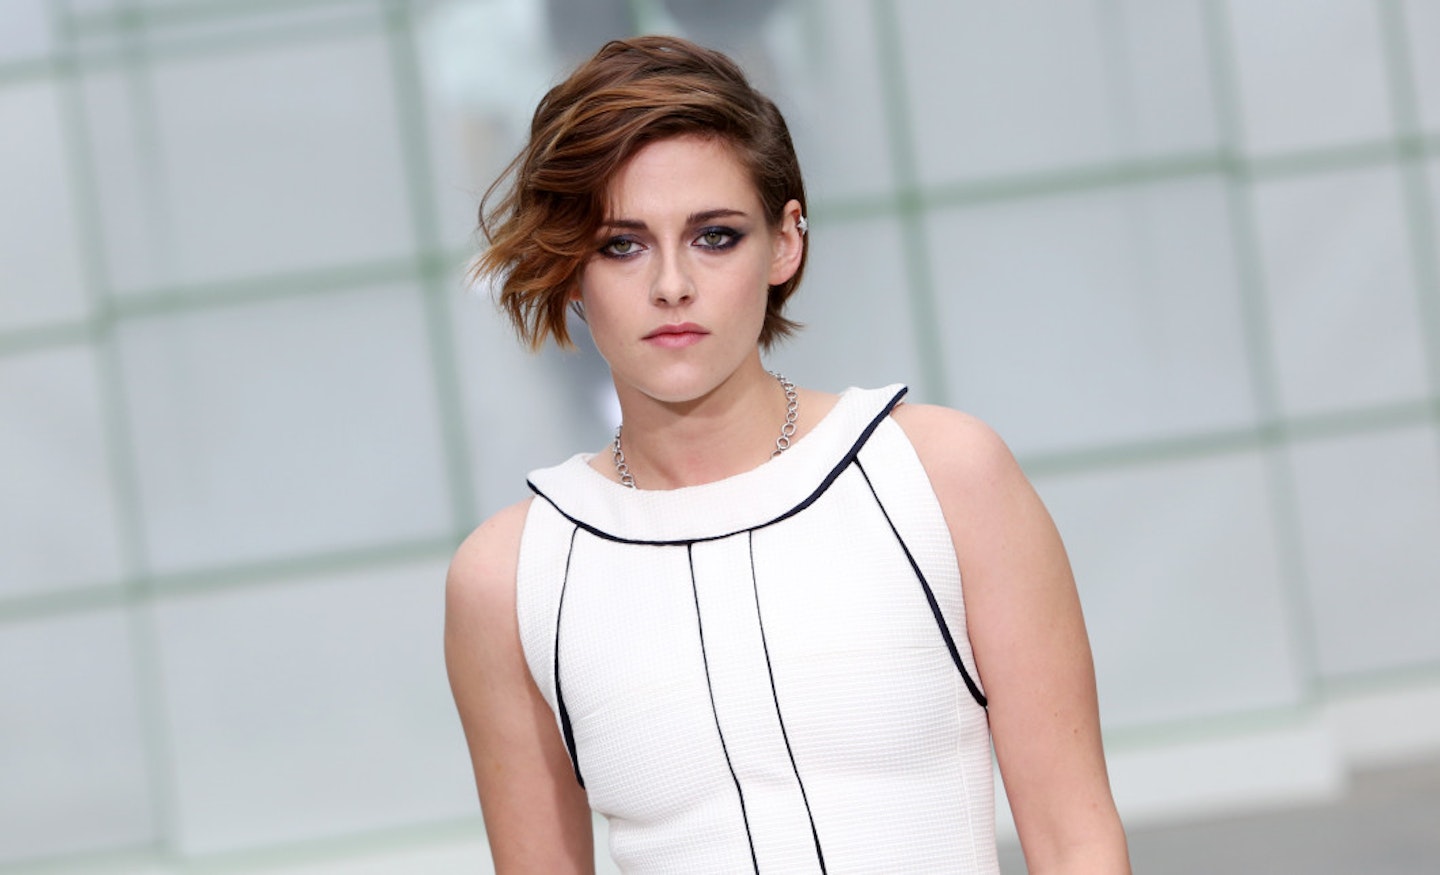 Kristen Stewart To Star In A Chanel Campaign With Vanessa Paradis